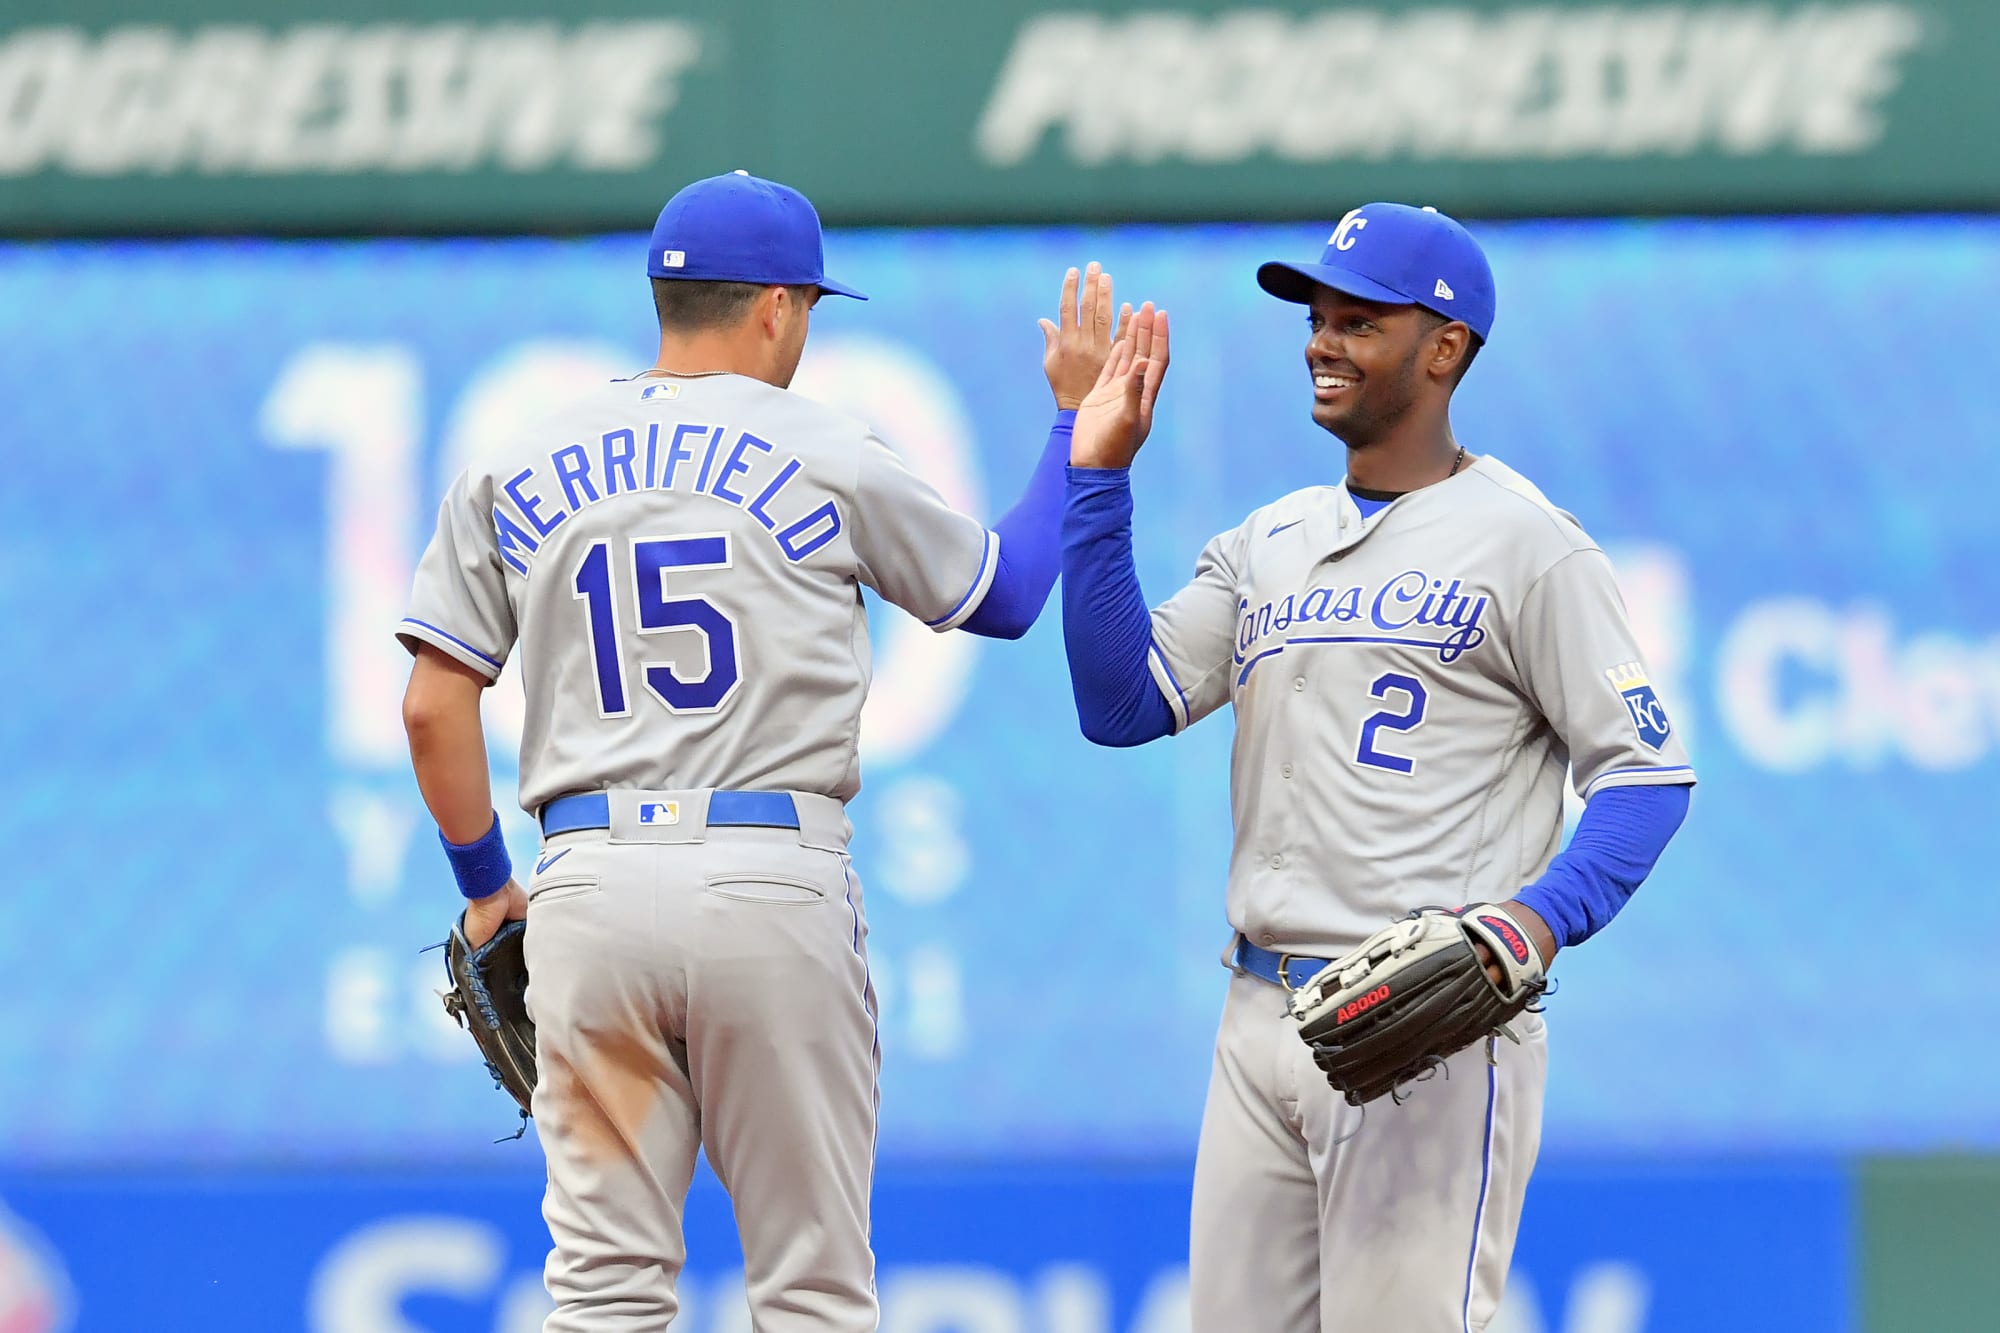 The KC Royals are doing exactly what they need to do